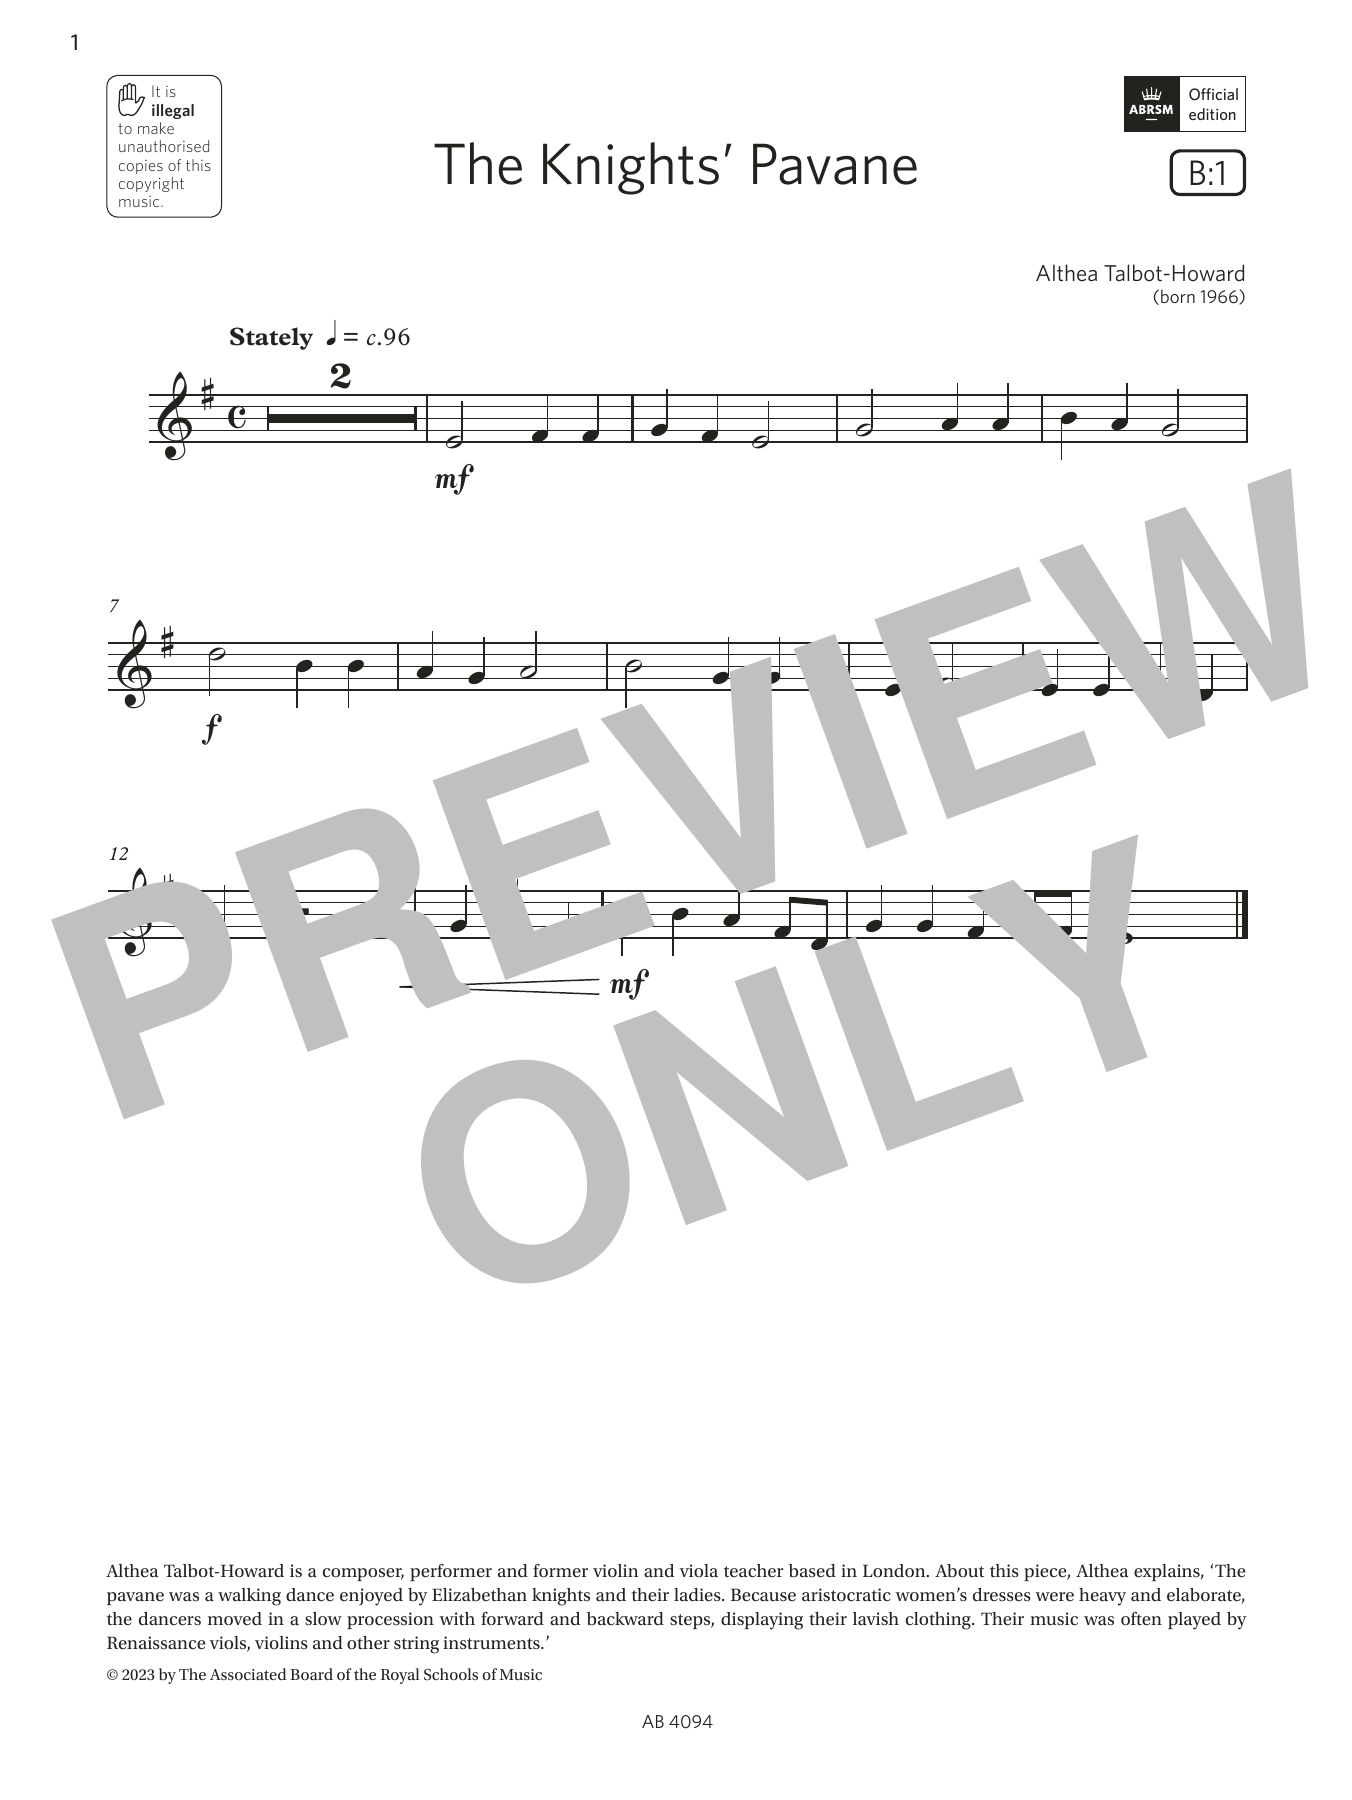 Download Althea Talbot-Howard The Knights' Pavane (Grade Initial, B1, Sheet Music